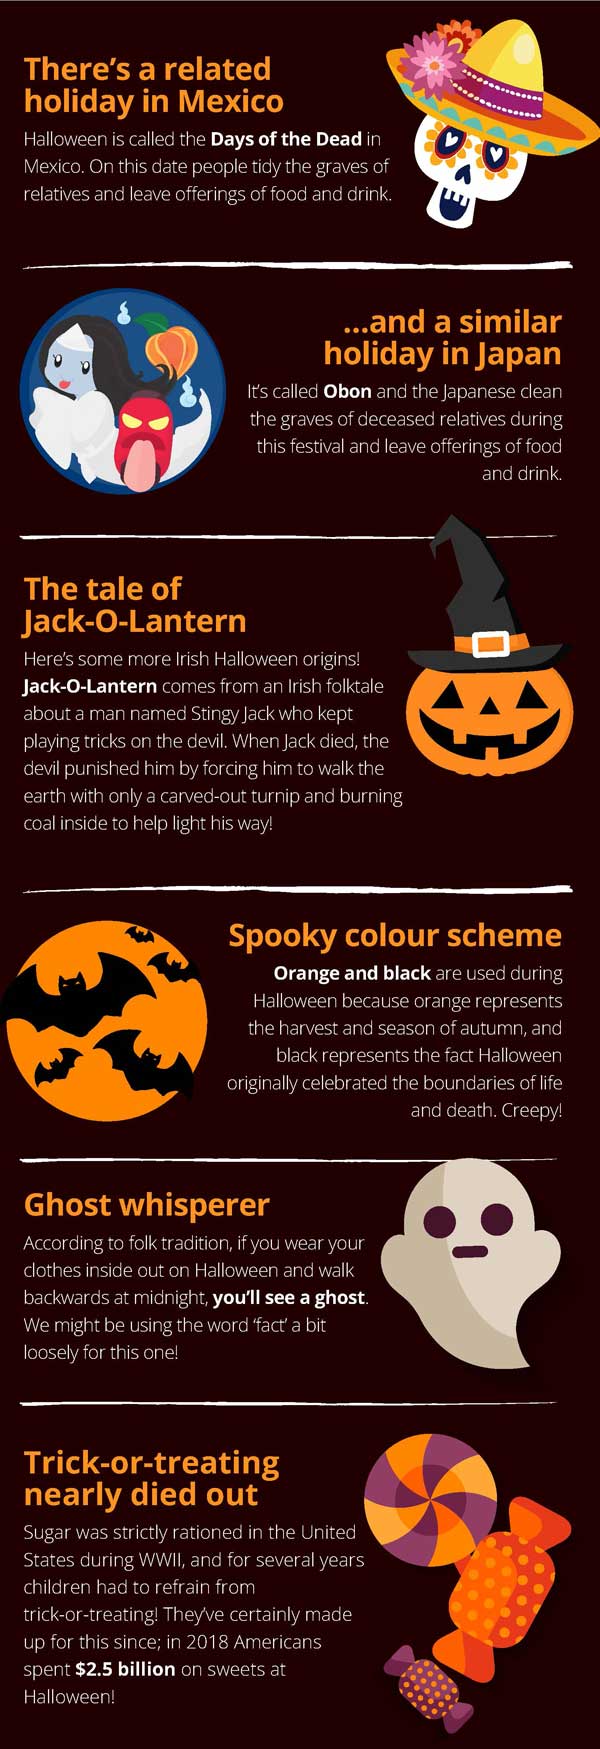 13 Halloween facts infographic, fun and unusual facts you may not know